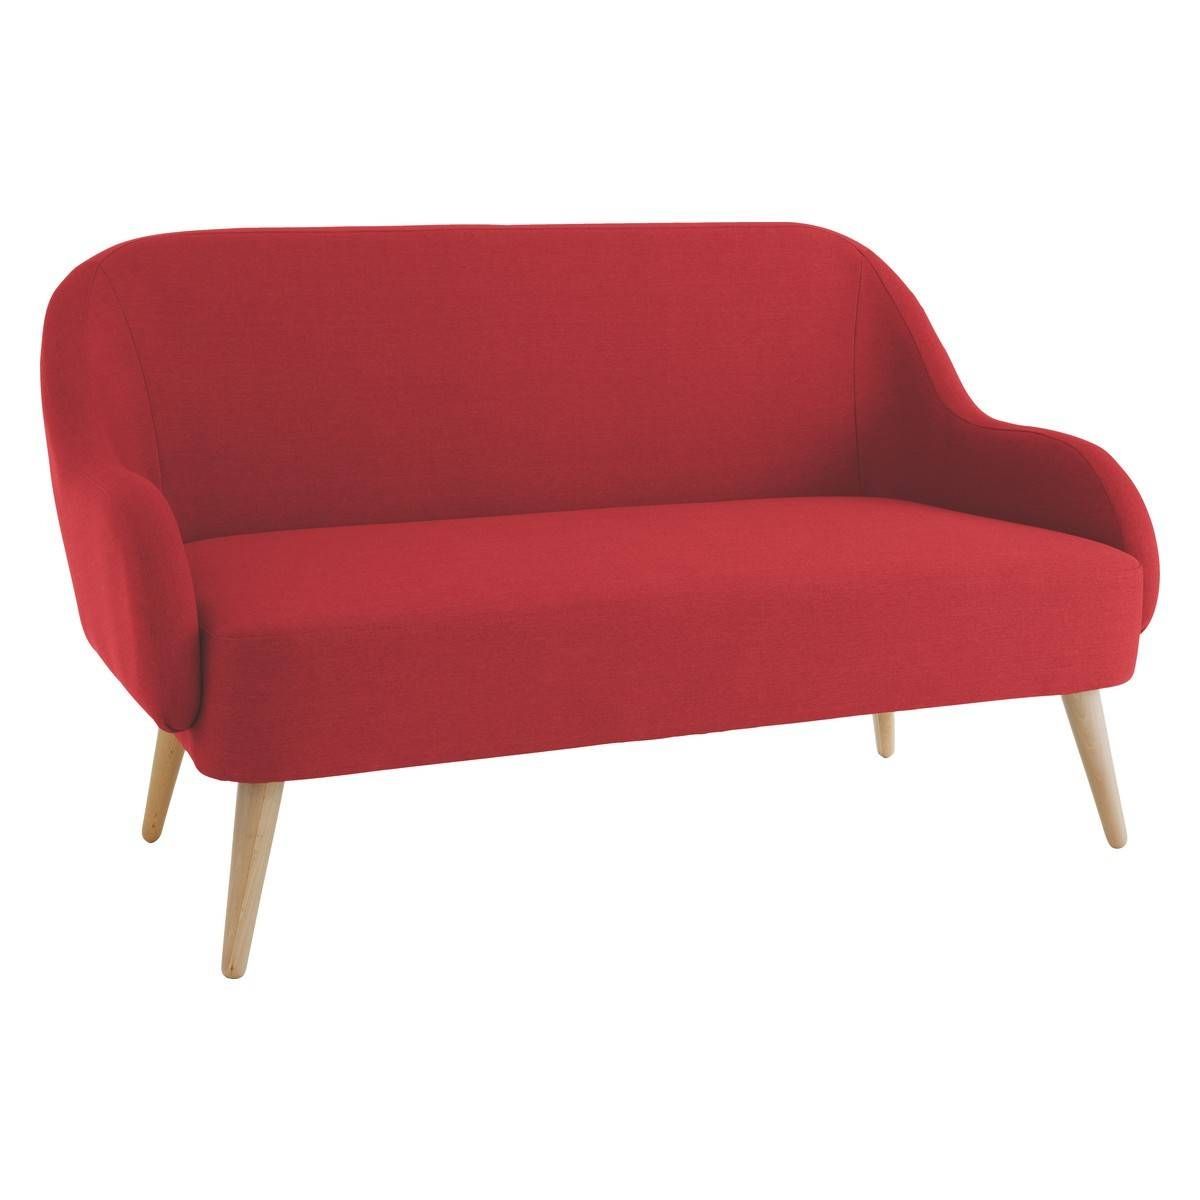 Momo Red Fabric 2 Seater Sofa | Buy Now At Habitat Uk Pertaining To 2 Seater Sofas (View 13 of 30)